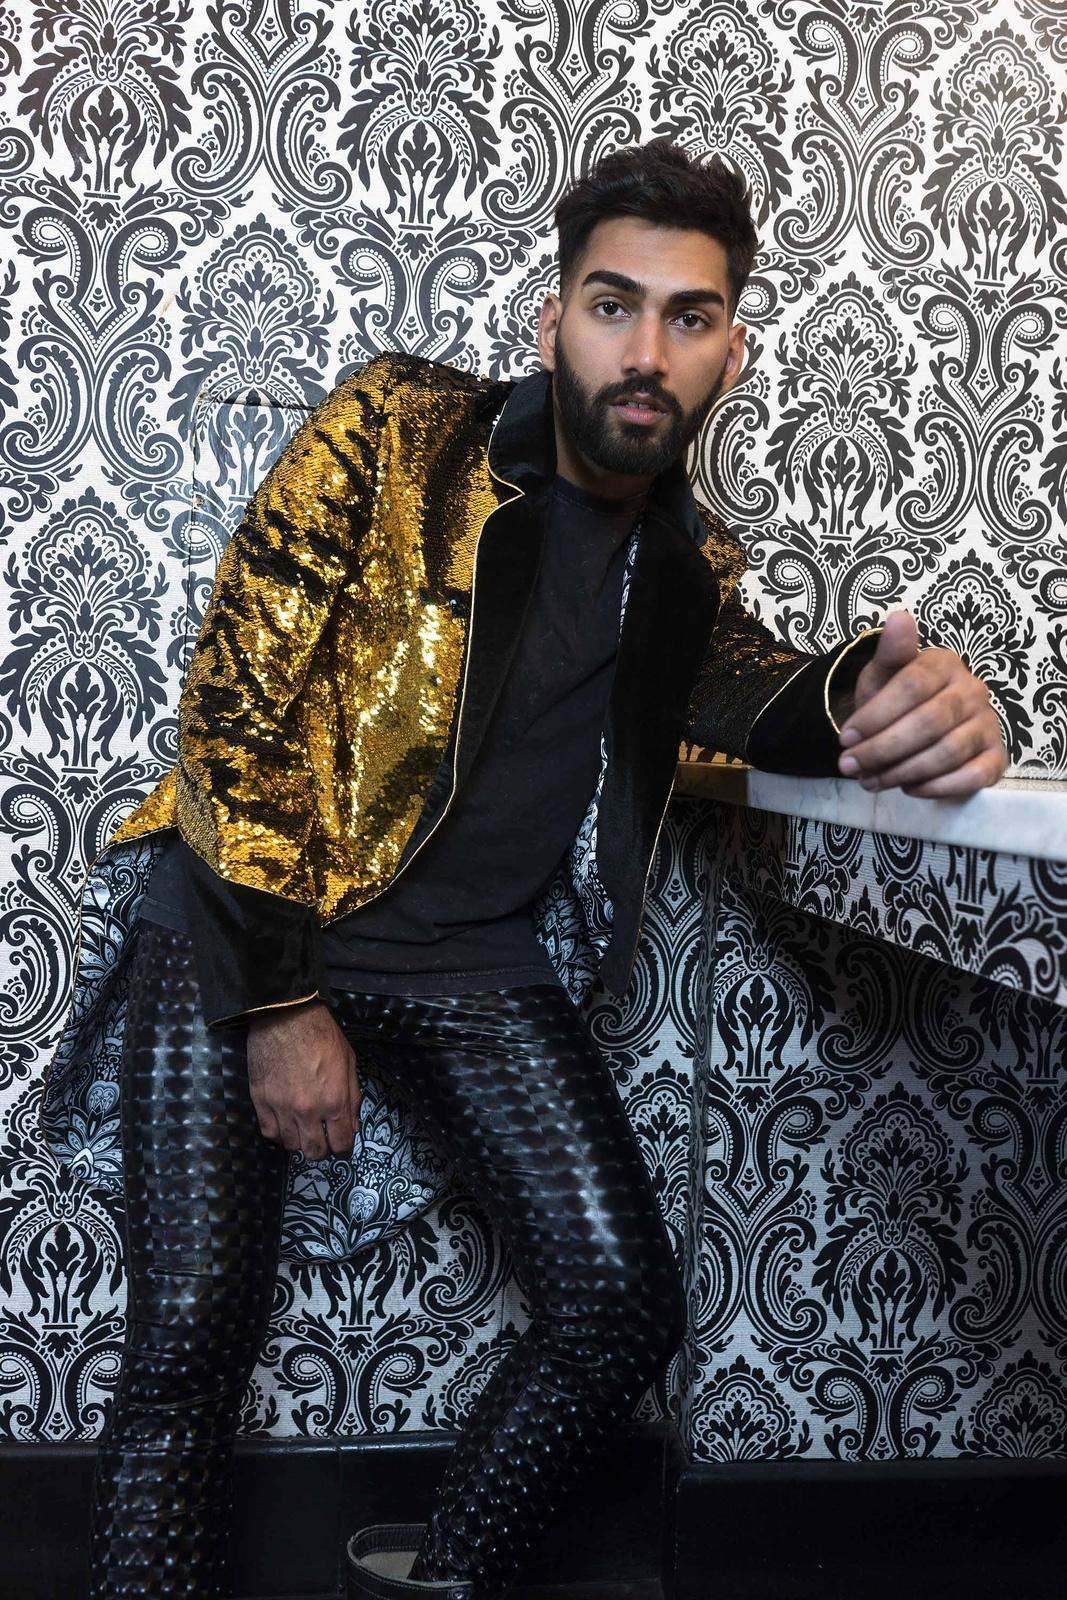 Mens black and gold Sequin jacket by Love Khaos mens festival clothing brand